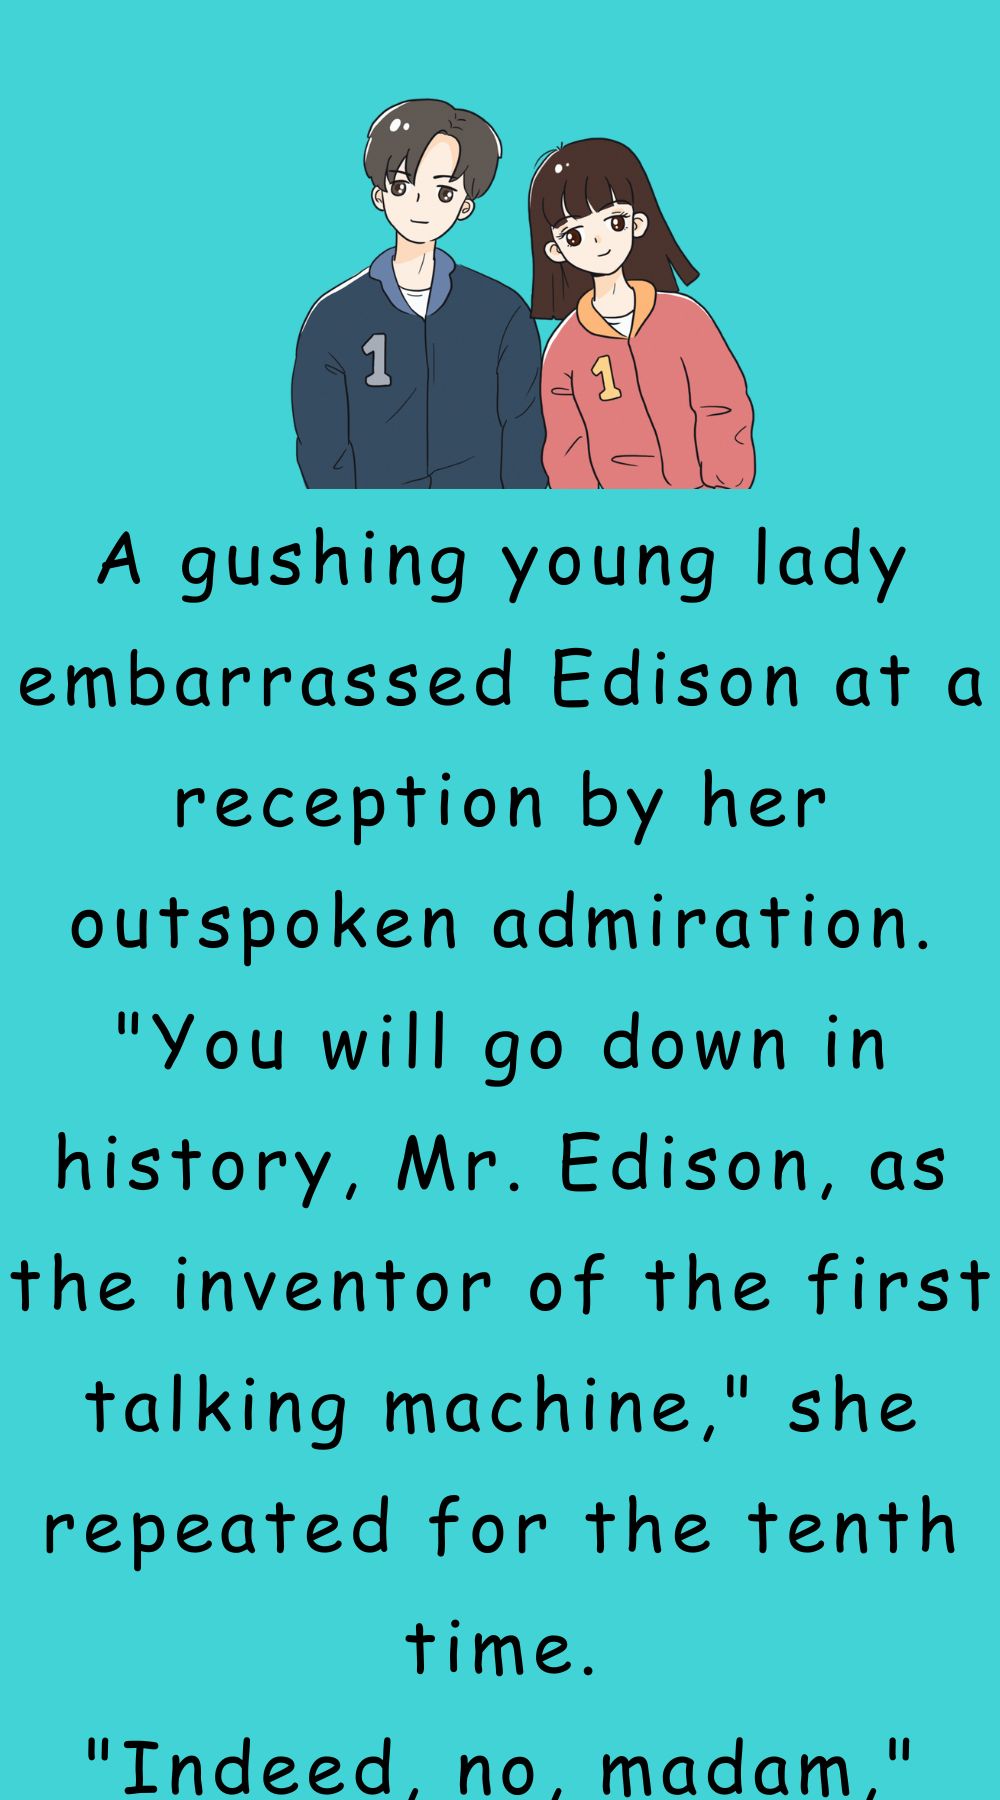 A gushing young lady embarrassed Edison